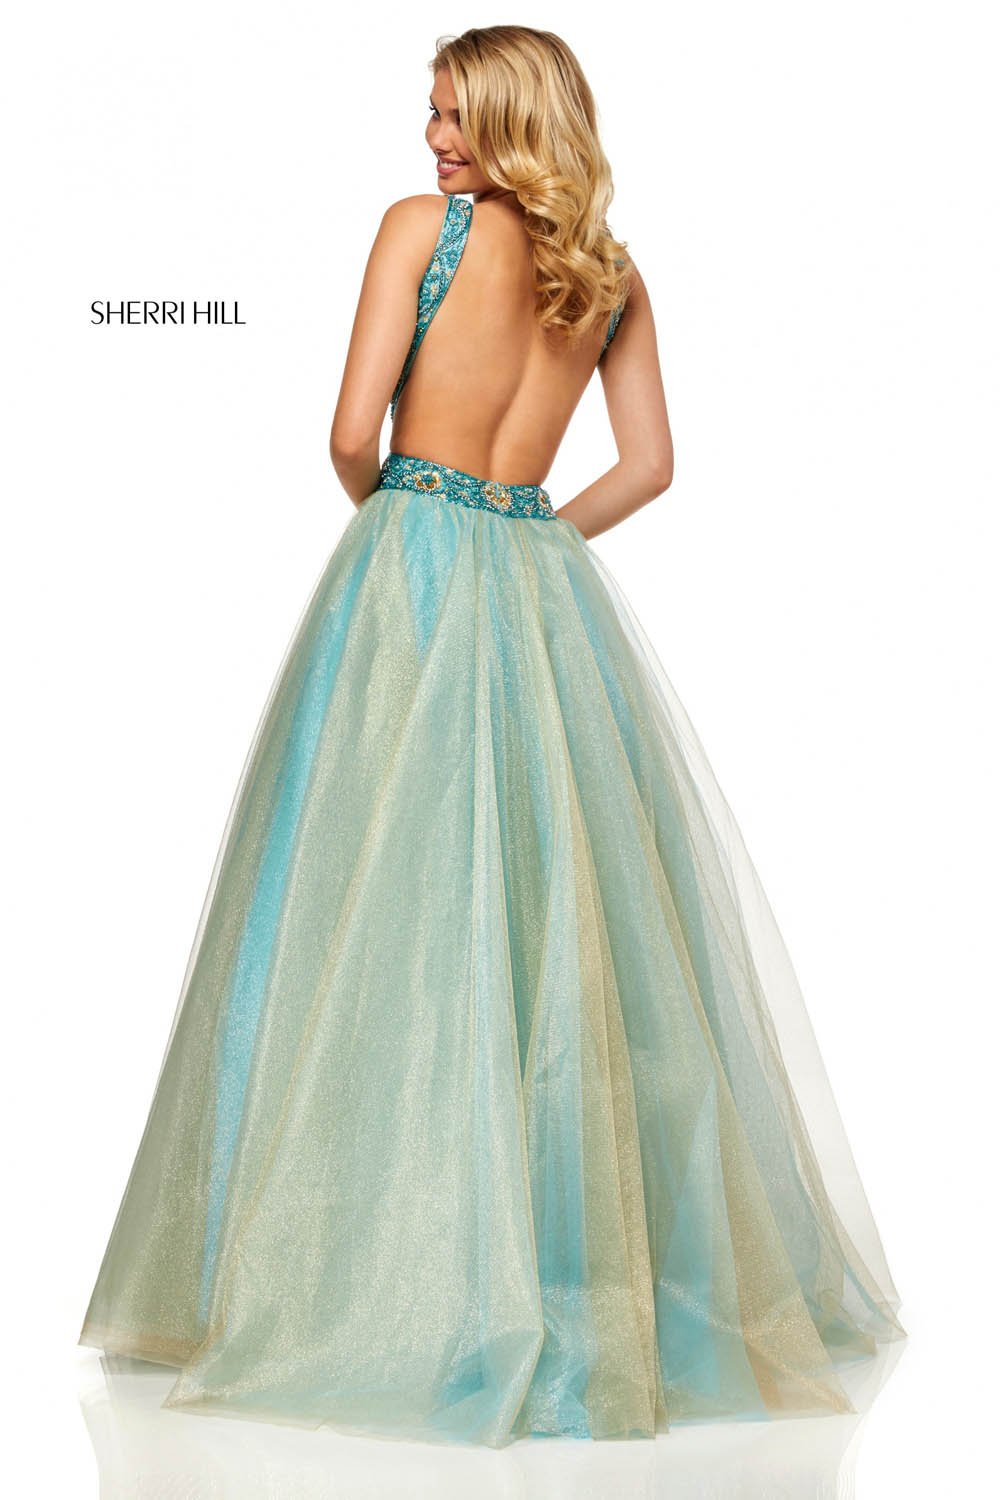 Sherri Hill 52403 dress images in these colors: Light Blue Gold.